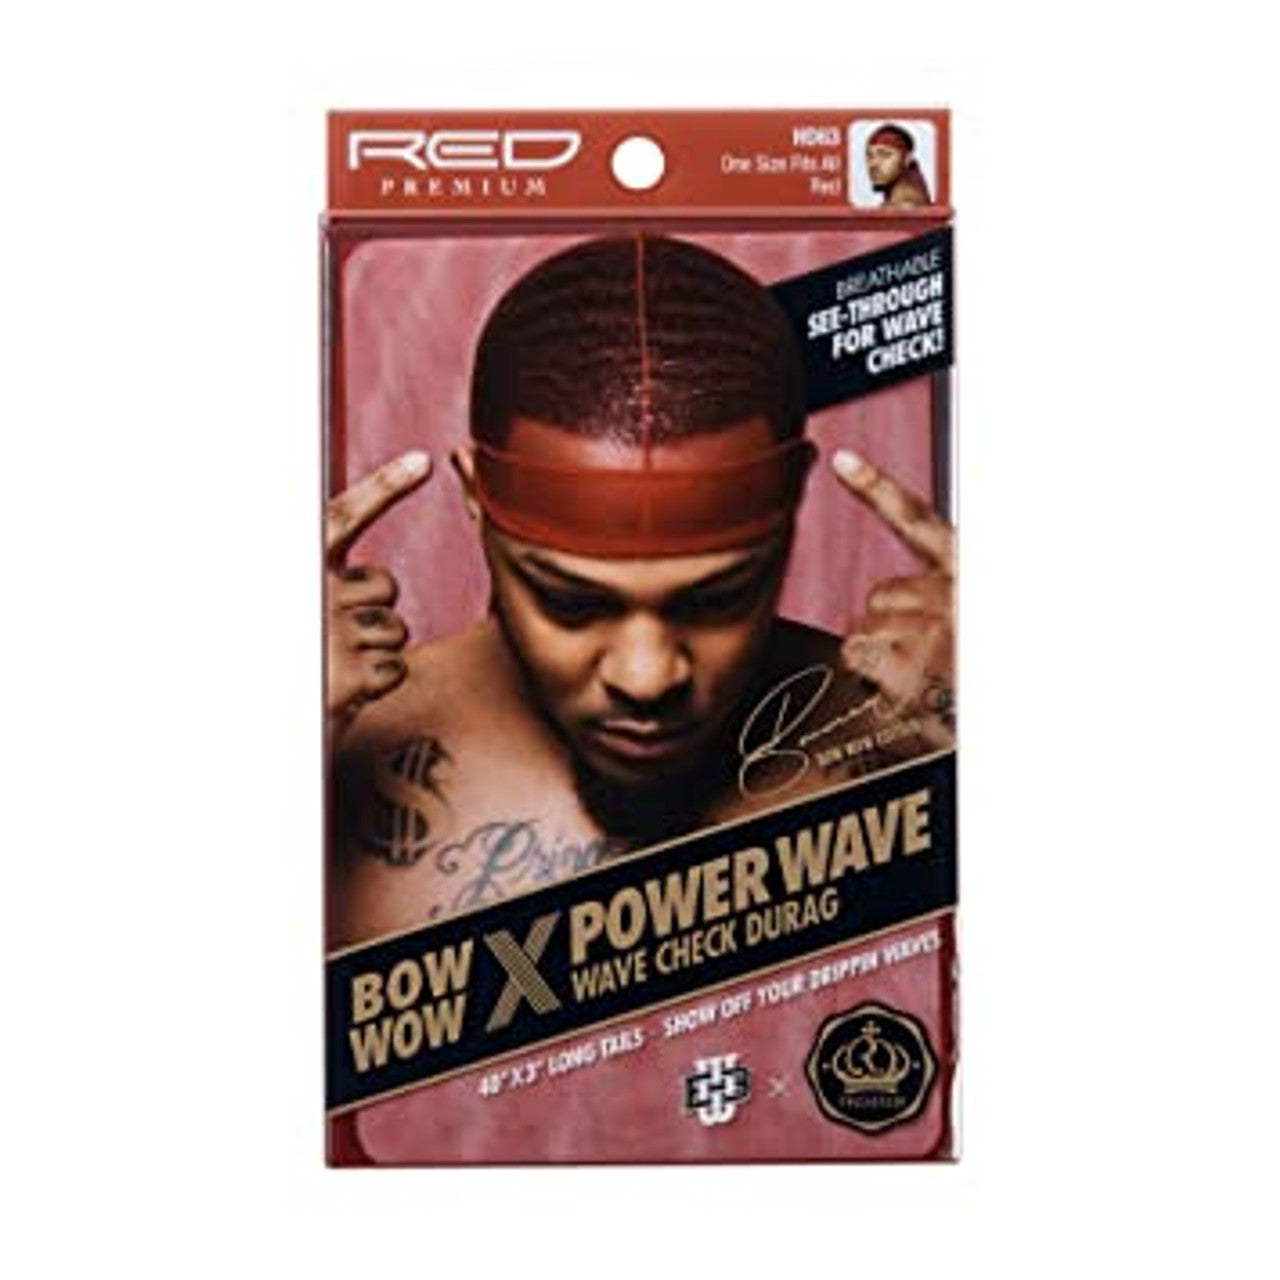 Red Premium Bow Wow X Power Wave Wave Check Durag - Red - #HD63